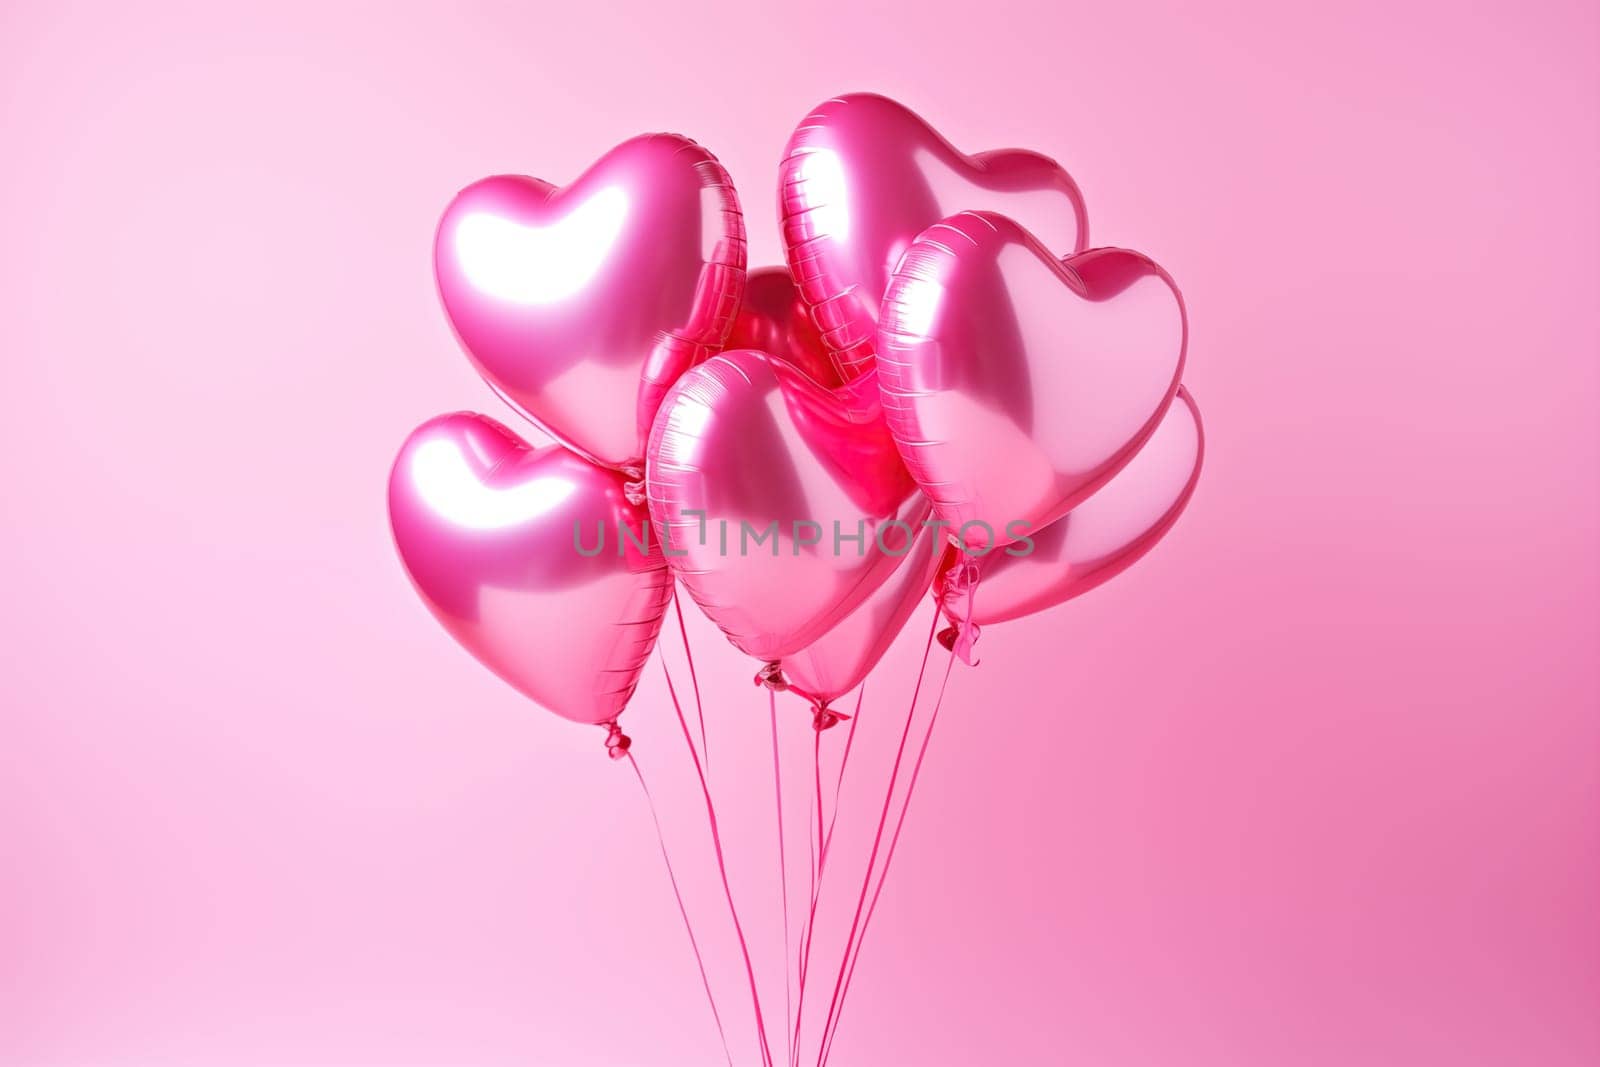 Pink Heart Balloons on a Soft Pink Background by dimol